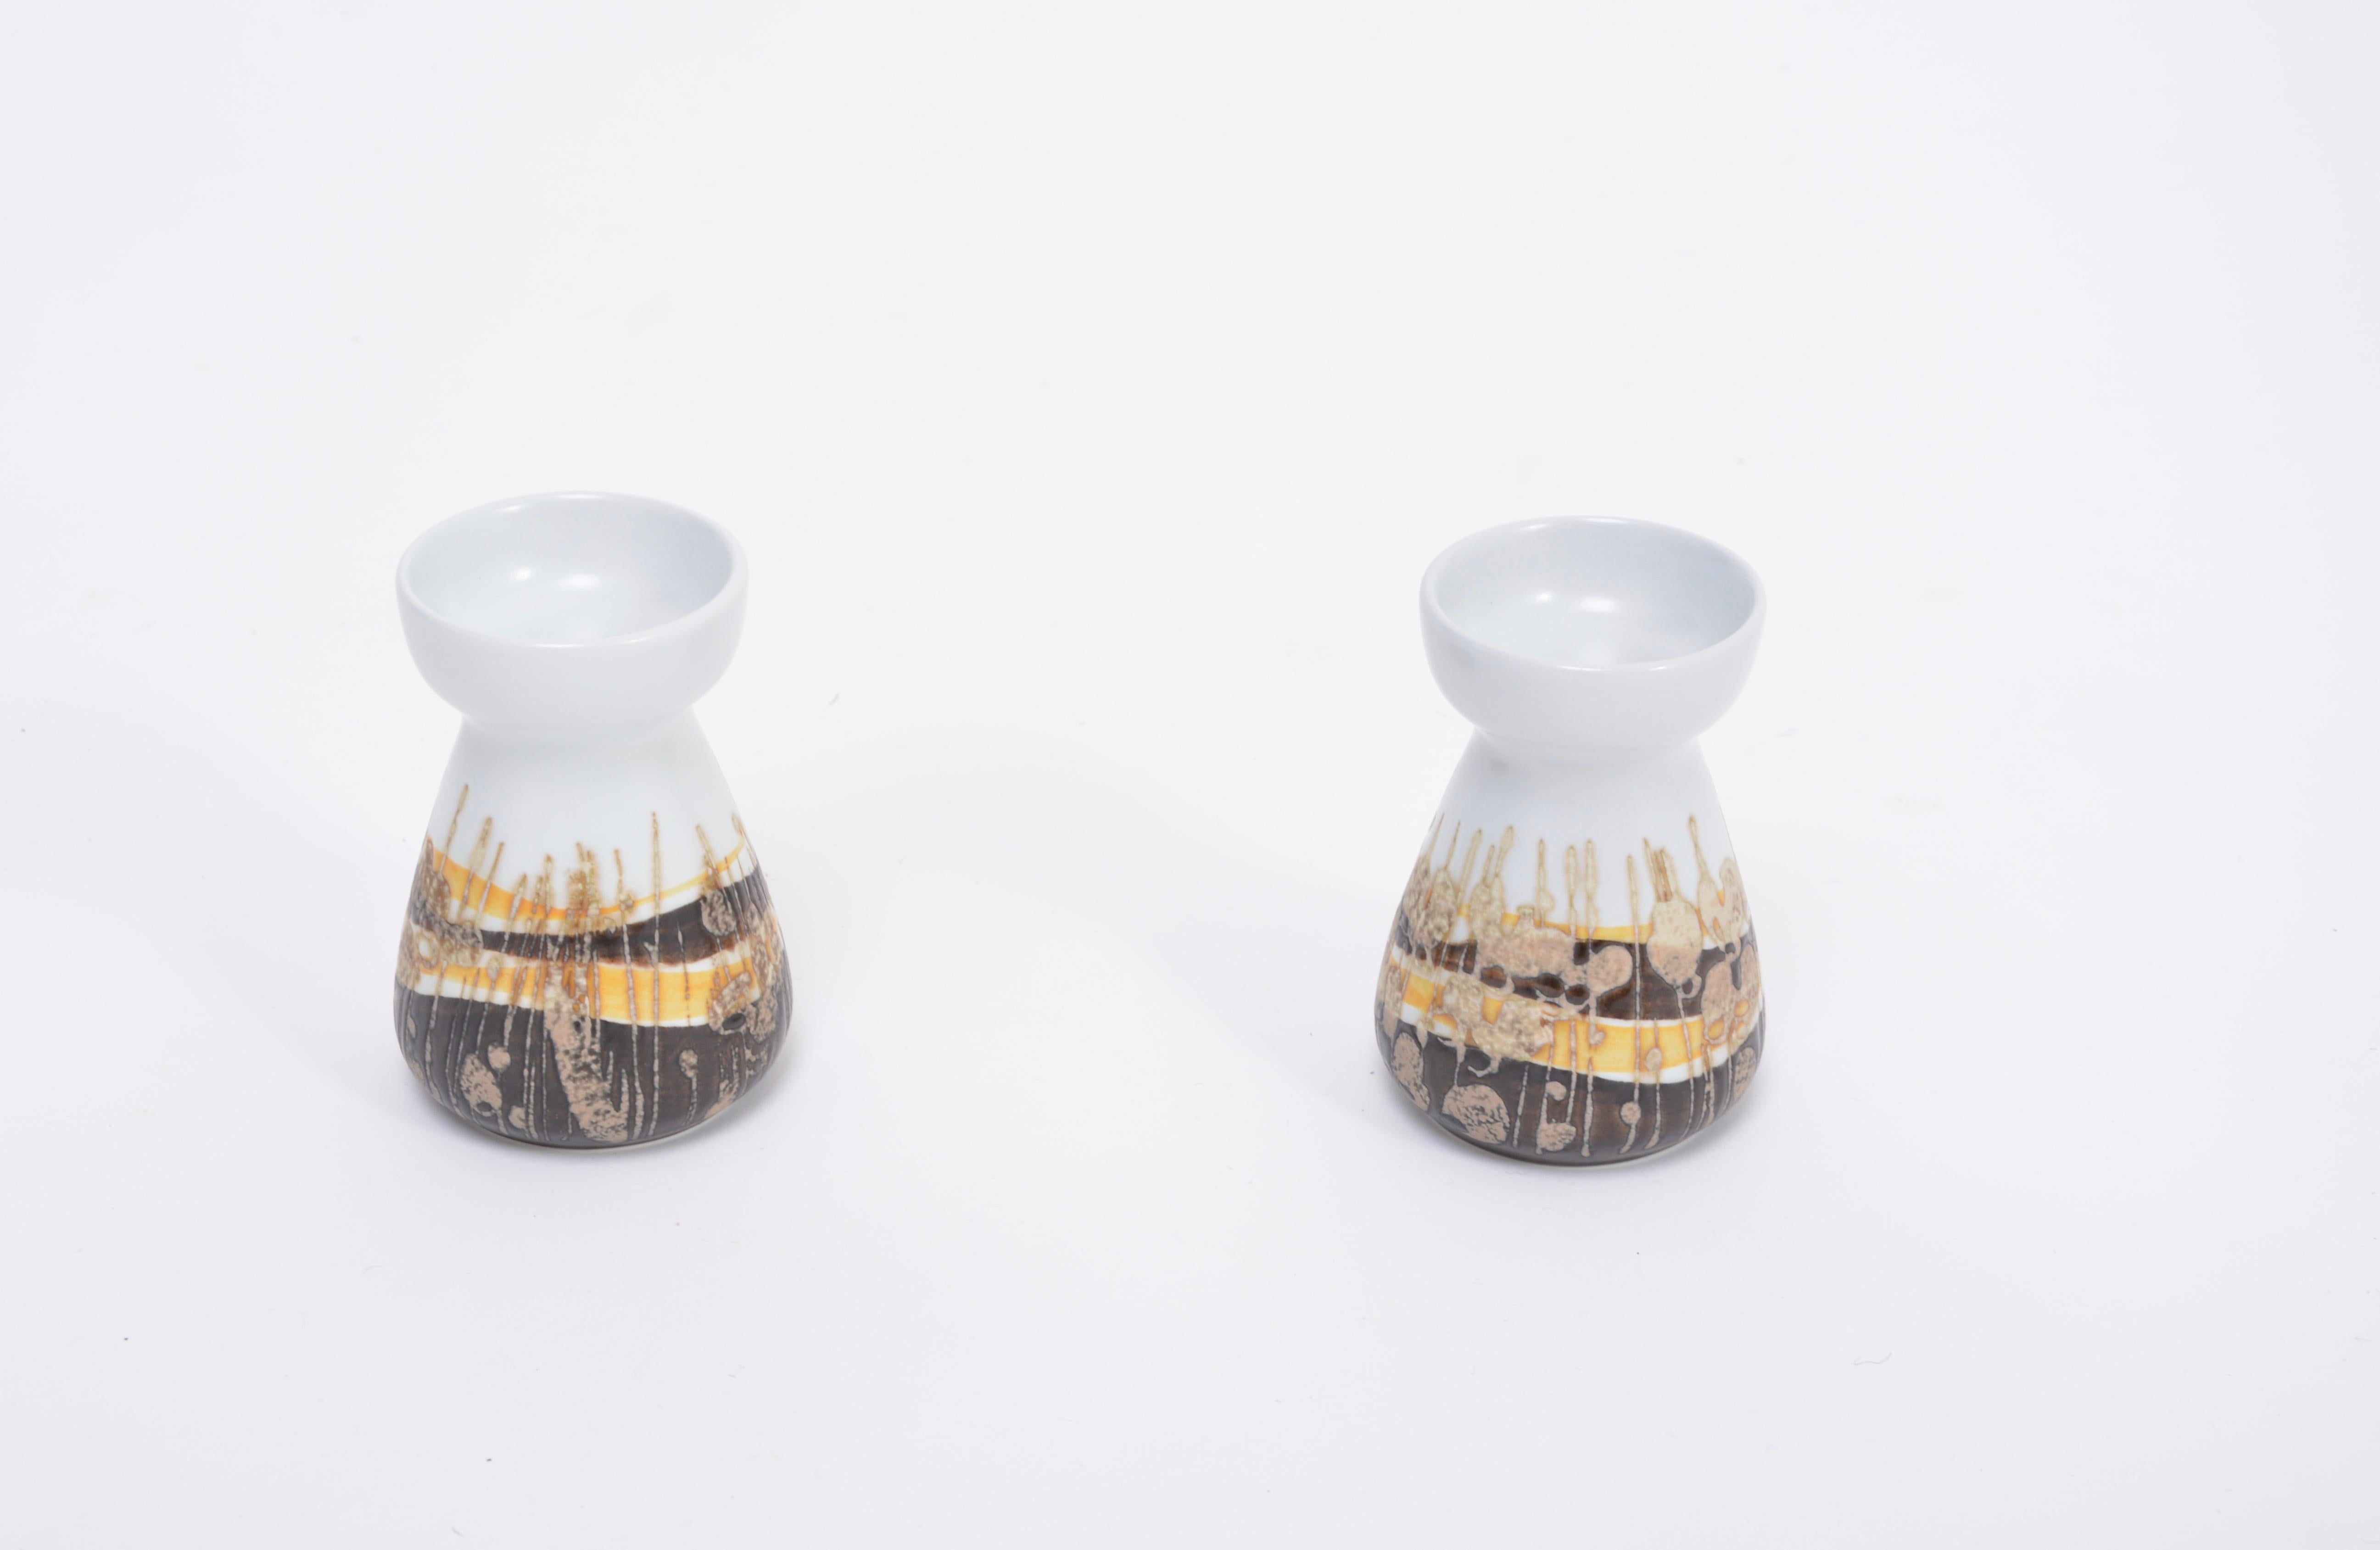 Pair of Midcentury Faience candleholders by Ivan Weiss for Royal Copenhagen 
These candle holders were designed by Nils Thorsson as part of the Baca series. Ivan Weiss designed the abstract floral pattern in colors of white, yellow and brown. They